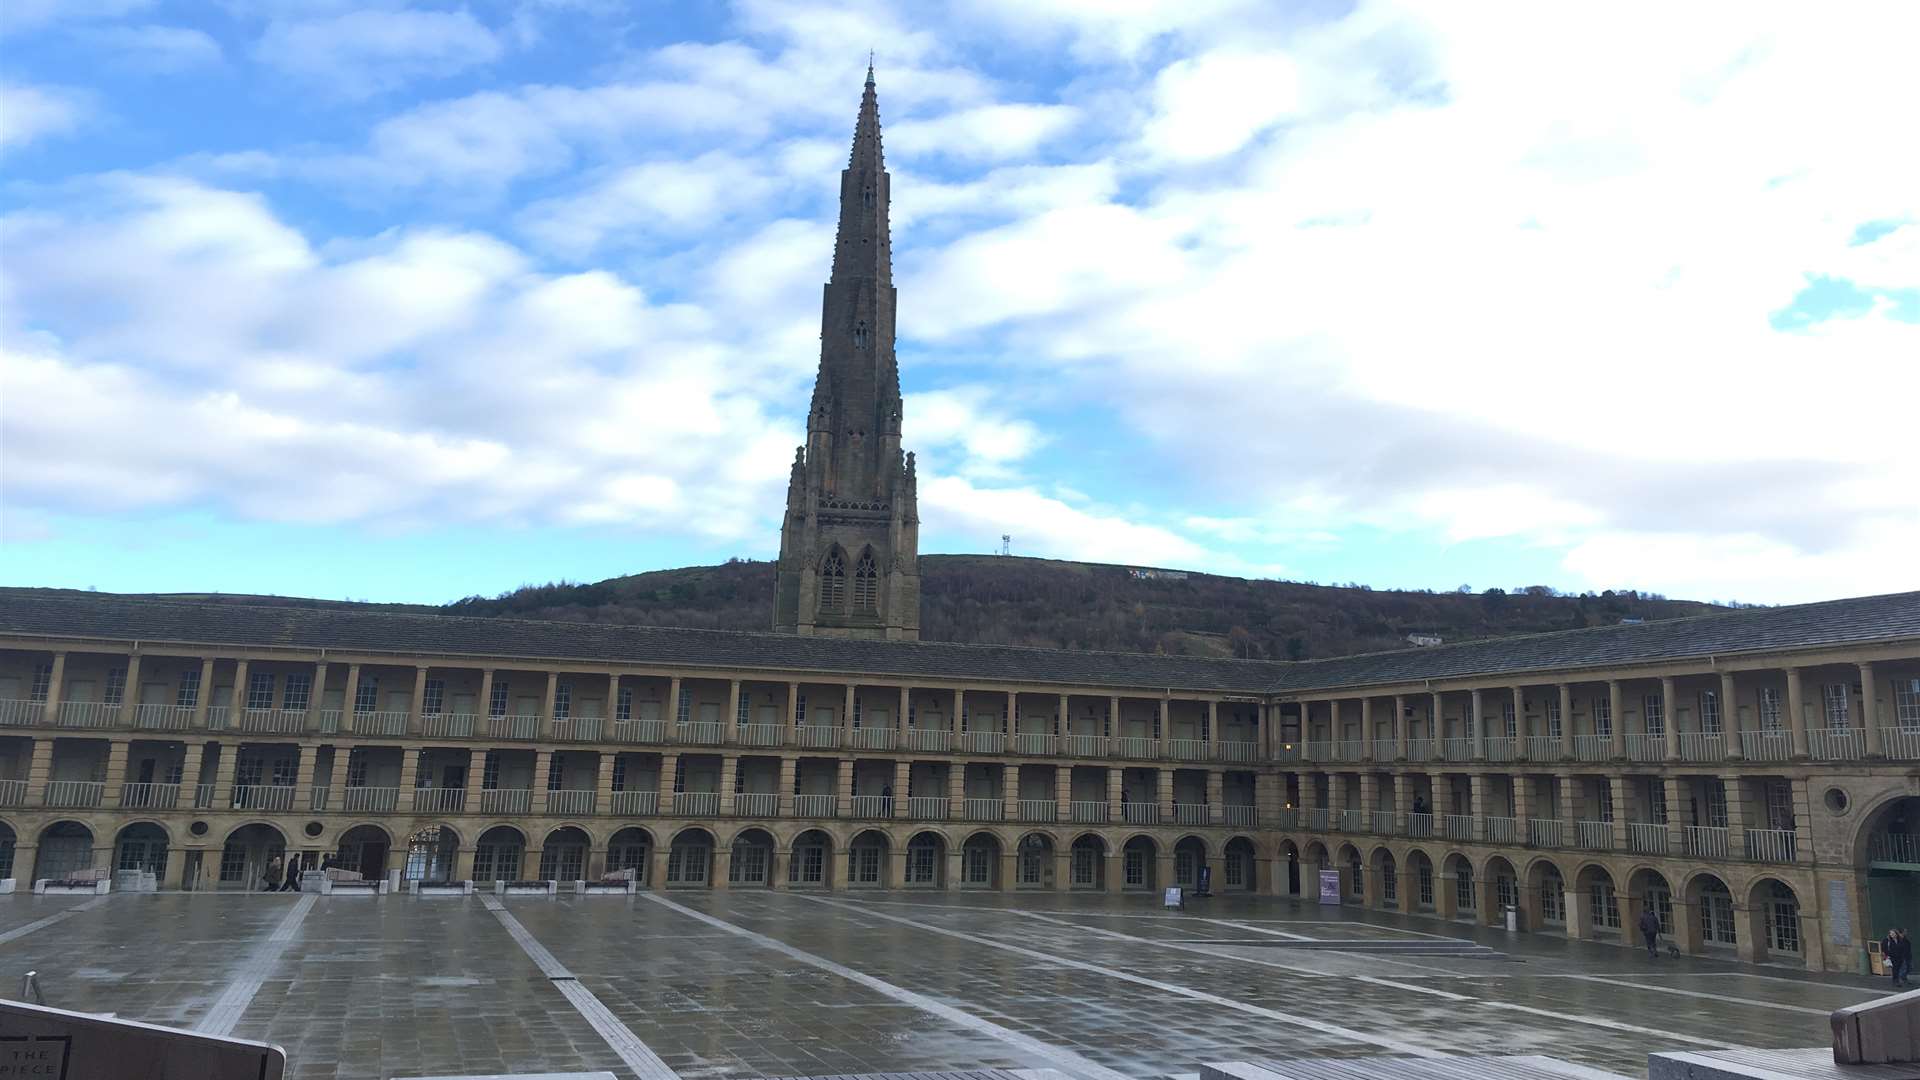 The Piece Hall reopened this autumn